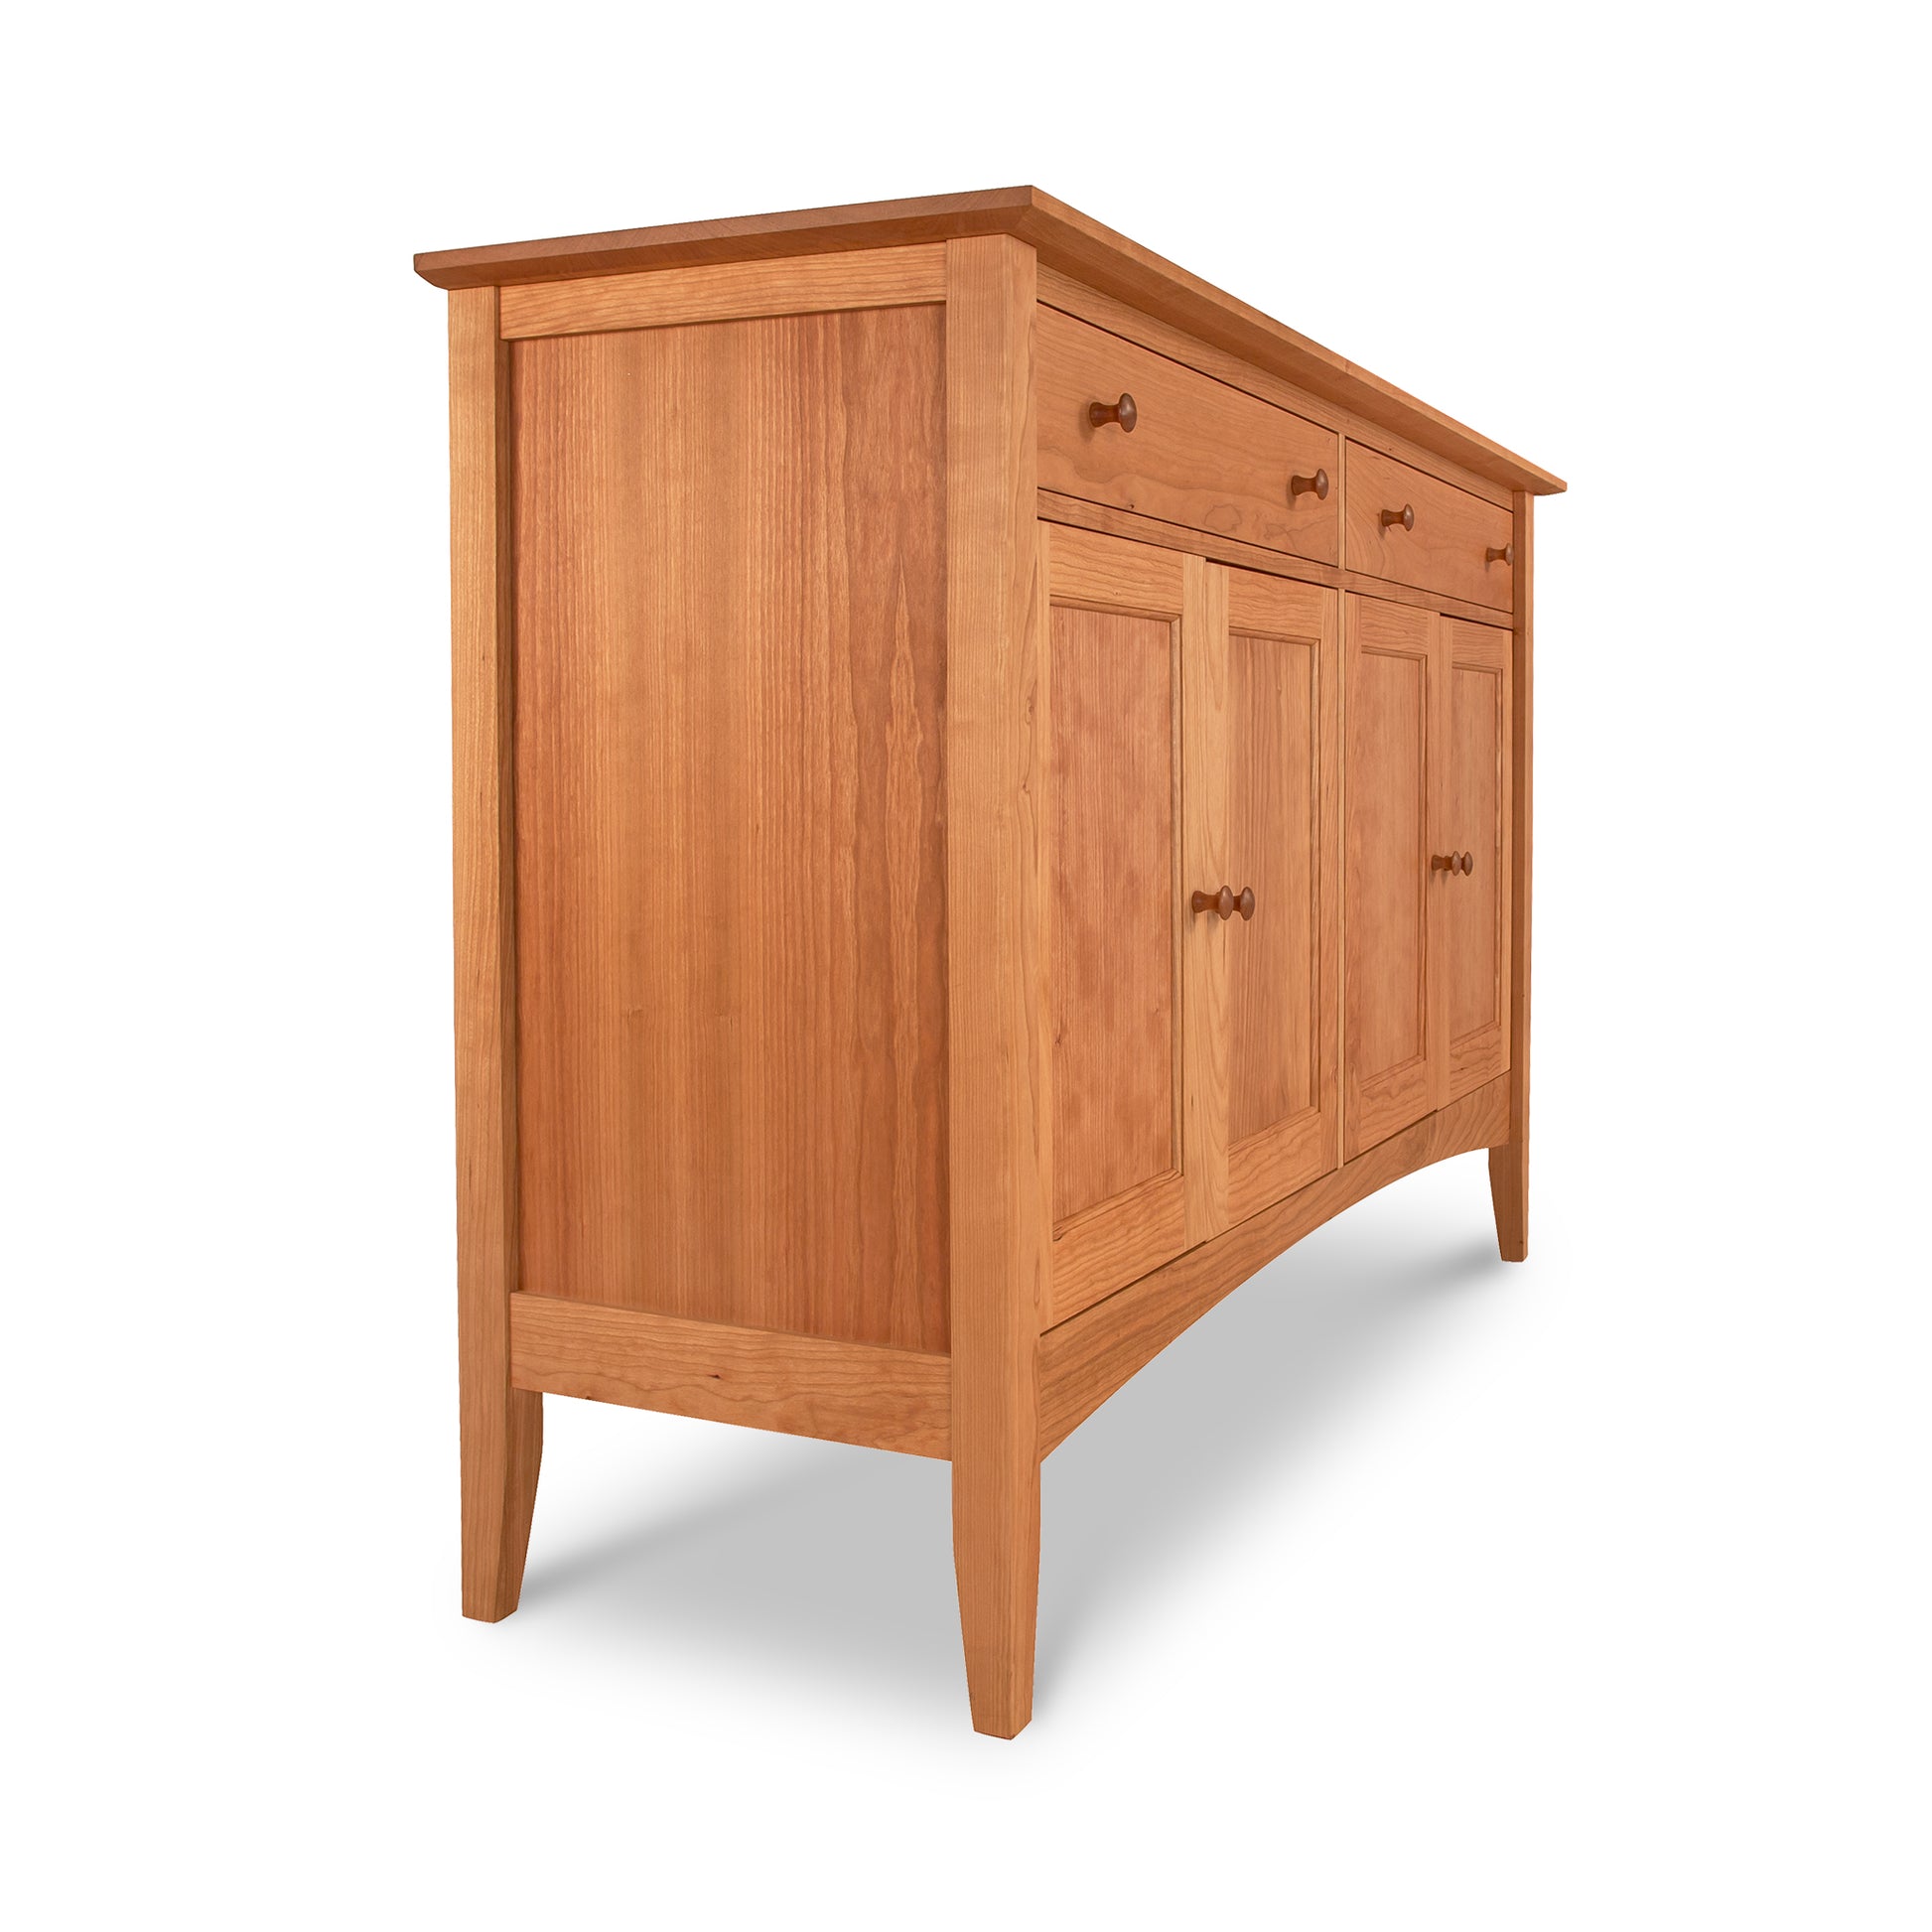 An Maple Corner Woodworks American Shaker Large Sideboard with three drawers and two side doors, featuring solid hardwood construction, displayed on a white background.